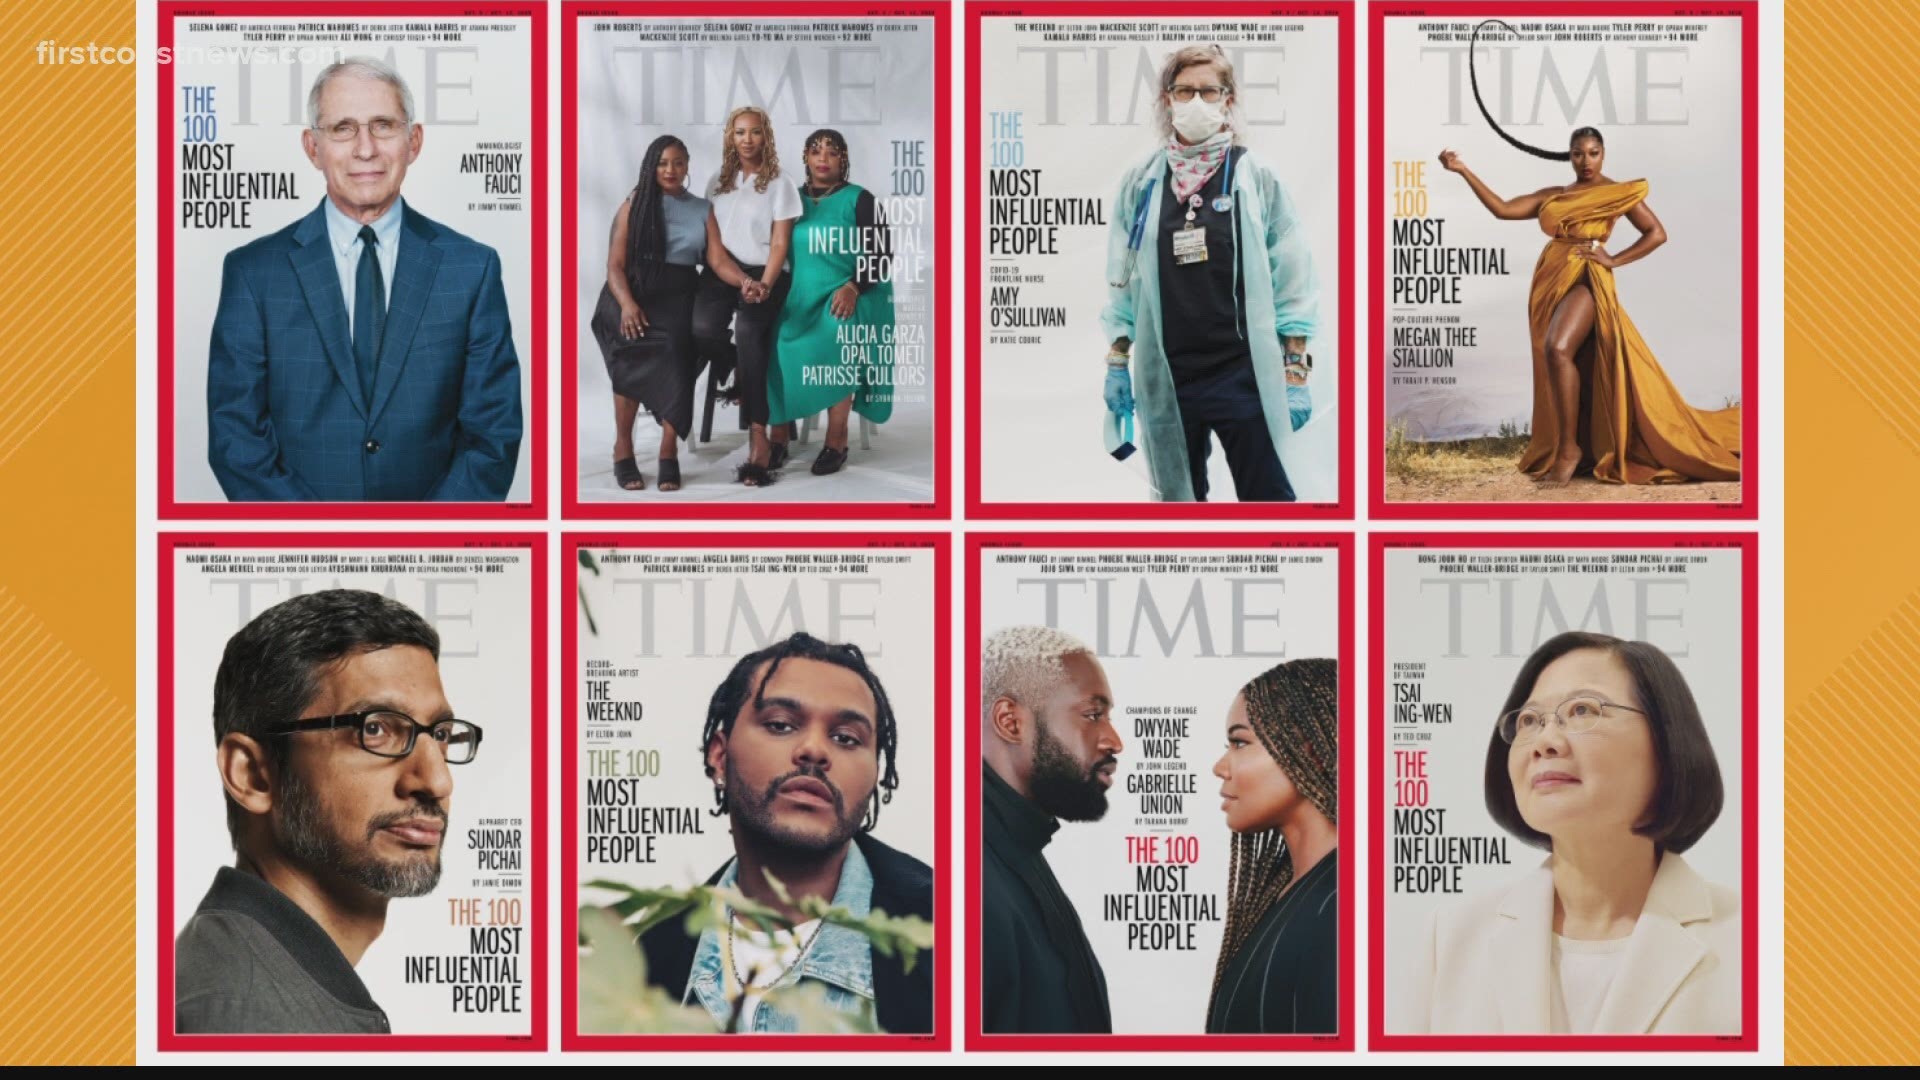 Time releases an edition of its magazine dedicated to 100 of the most influential people each year.